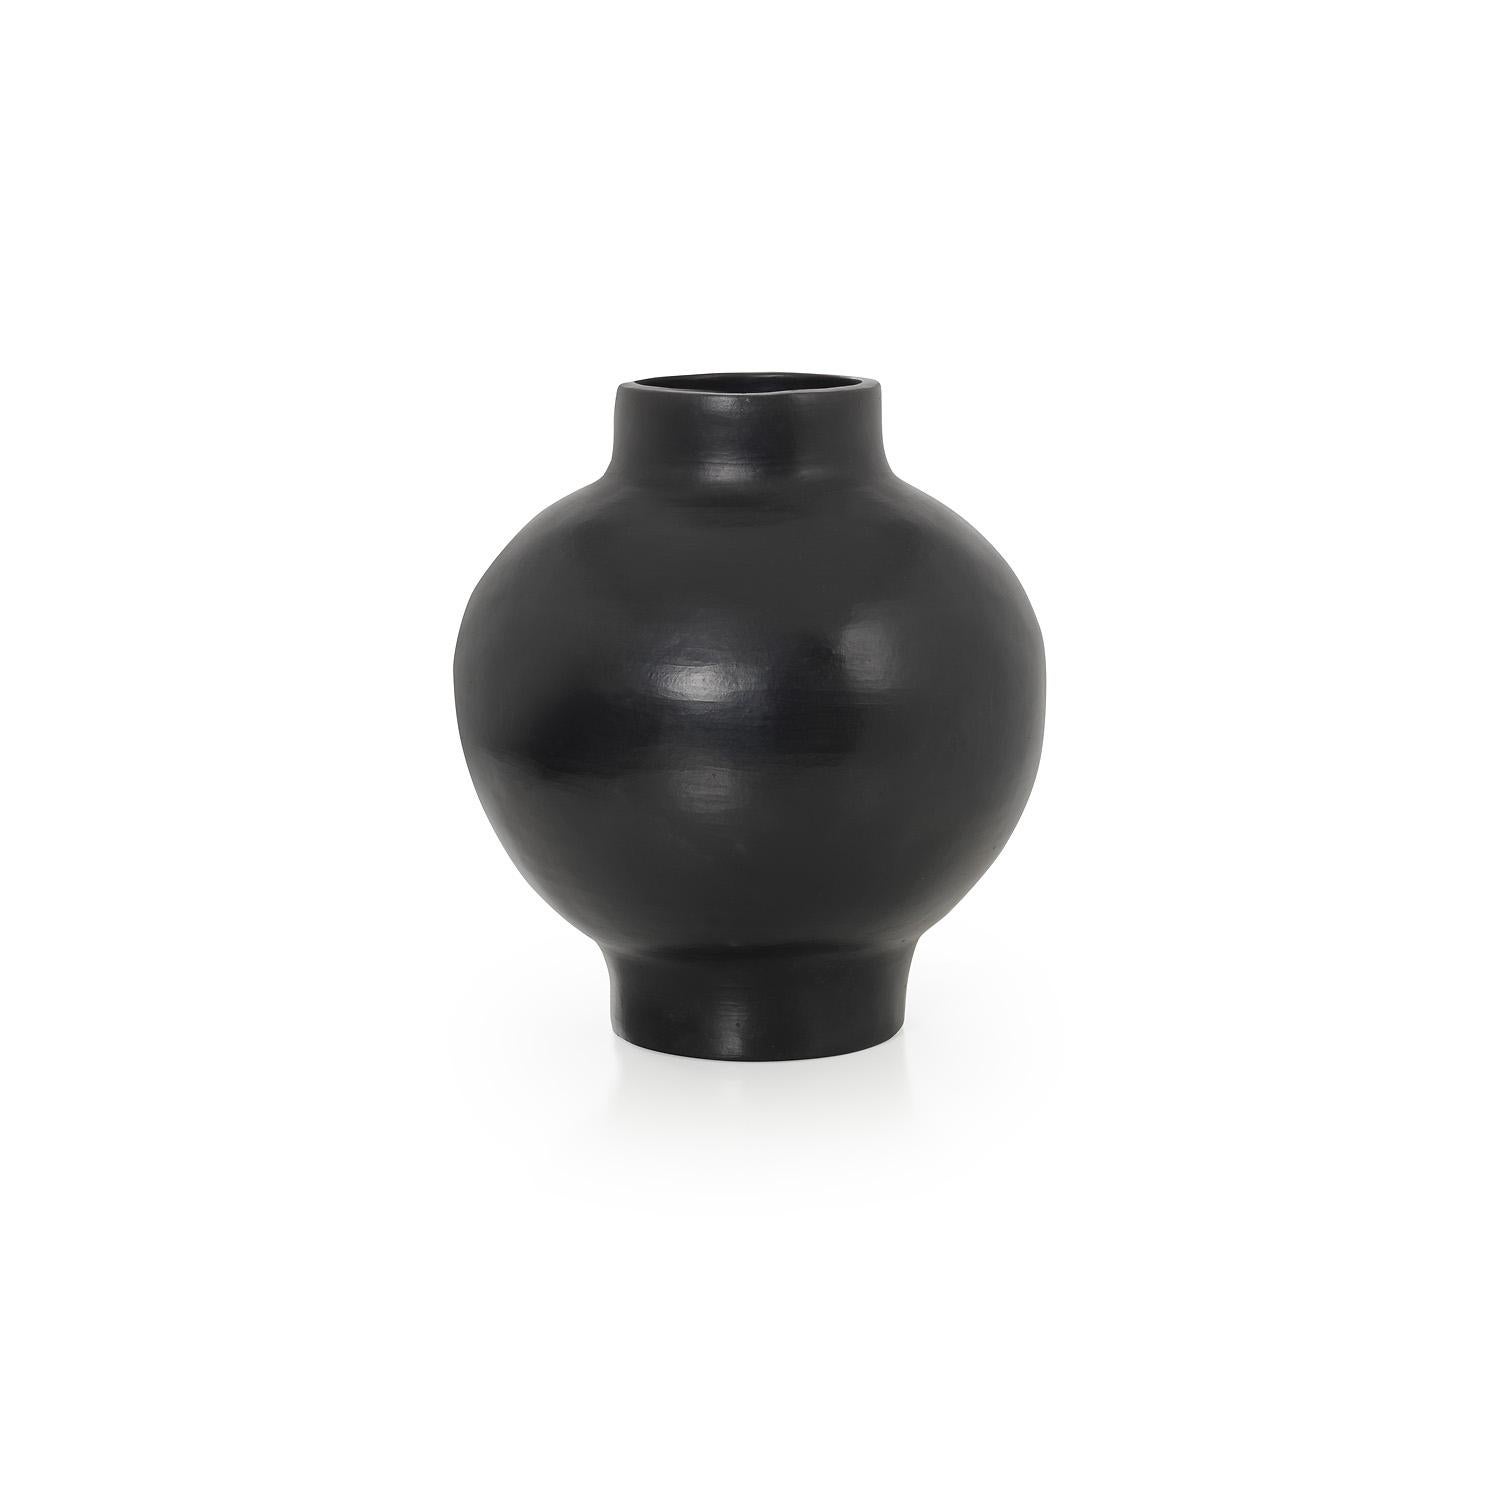 Large vase by Sebastian Herkner
Materials: Heat-resistant black ceramic. 
Technique: Glazed. Oven cooked and polished with semi-precious stones. 
Dimensions: Diameter 31 cm x H 34 cm 
Available in sizes small and mini.

This pot belongs to the